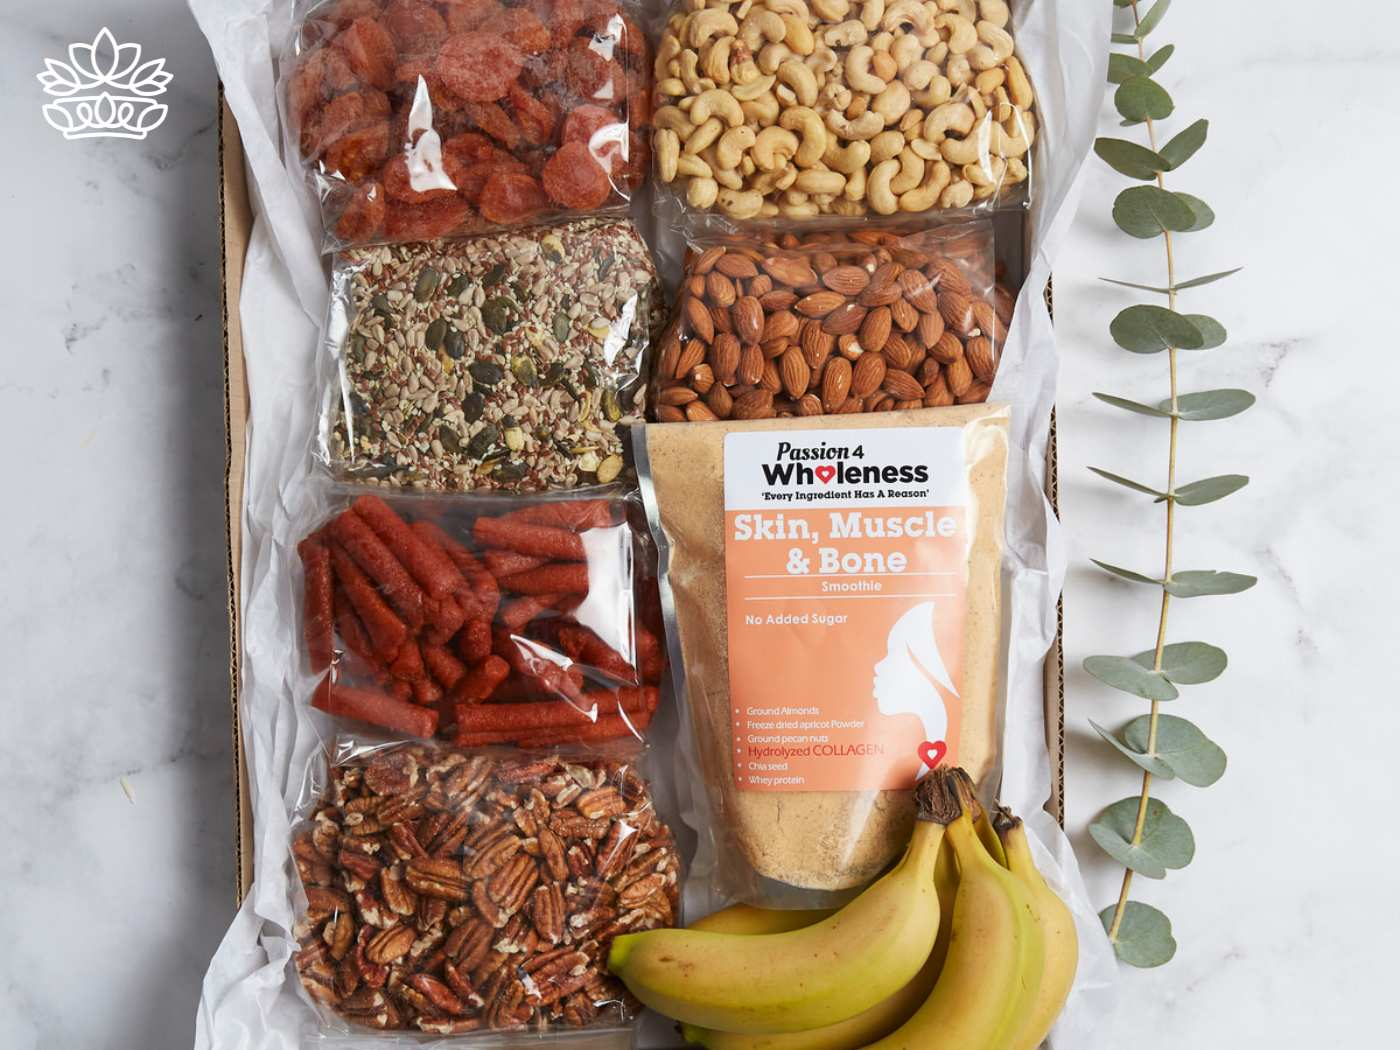 Assorted healthy snack gift box featuring dried strawberries, mixed seeds, seasoned baby carrots, pecans, cashews, and almonds, alongside a 'Passion 4 Wholeness' smoothie mix for skin, muscle, and bone health, adorned with a sprig of eucalyptus. Thoughtfully curated by Fabulous Flowers and Gifts, ideal for guest house and hotel deliveries with a personal touch.